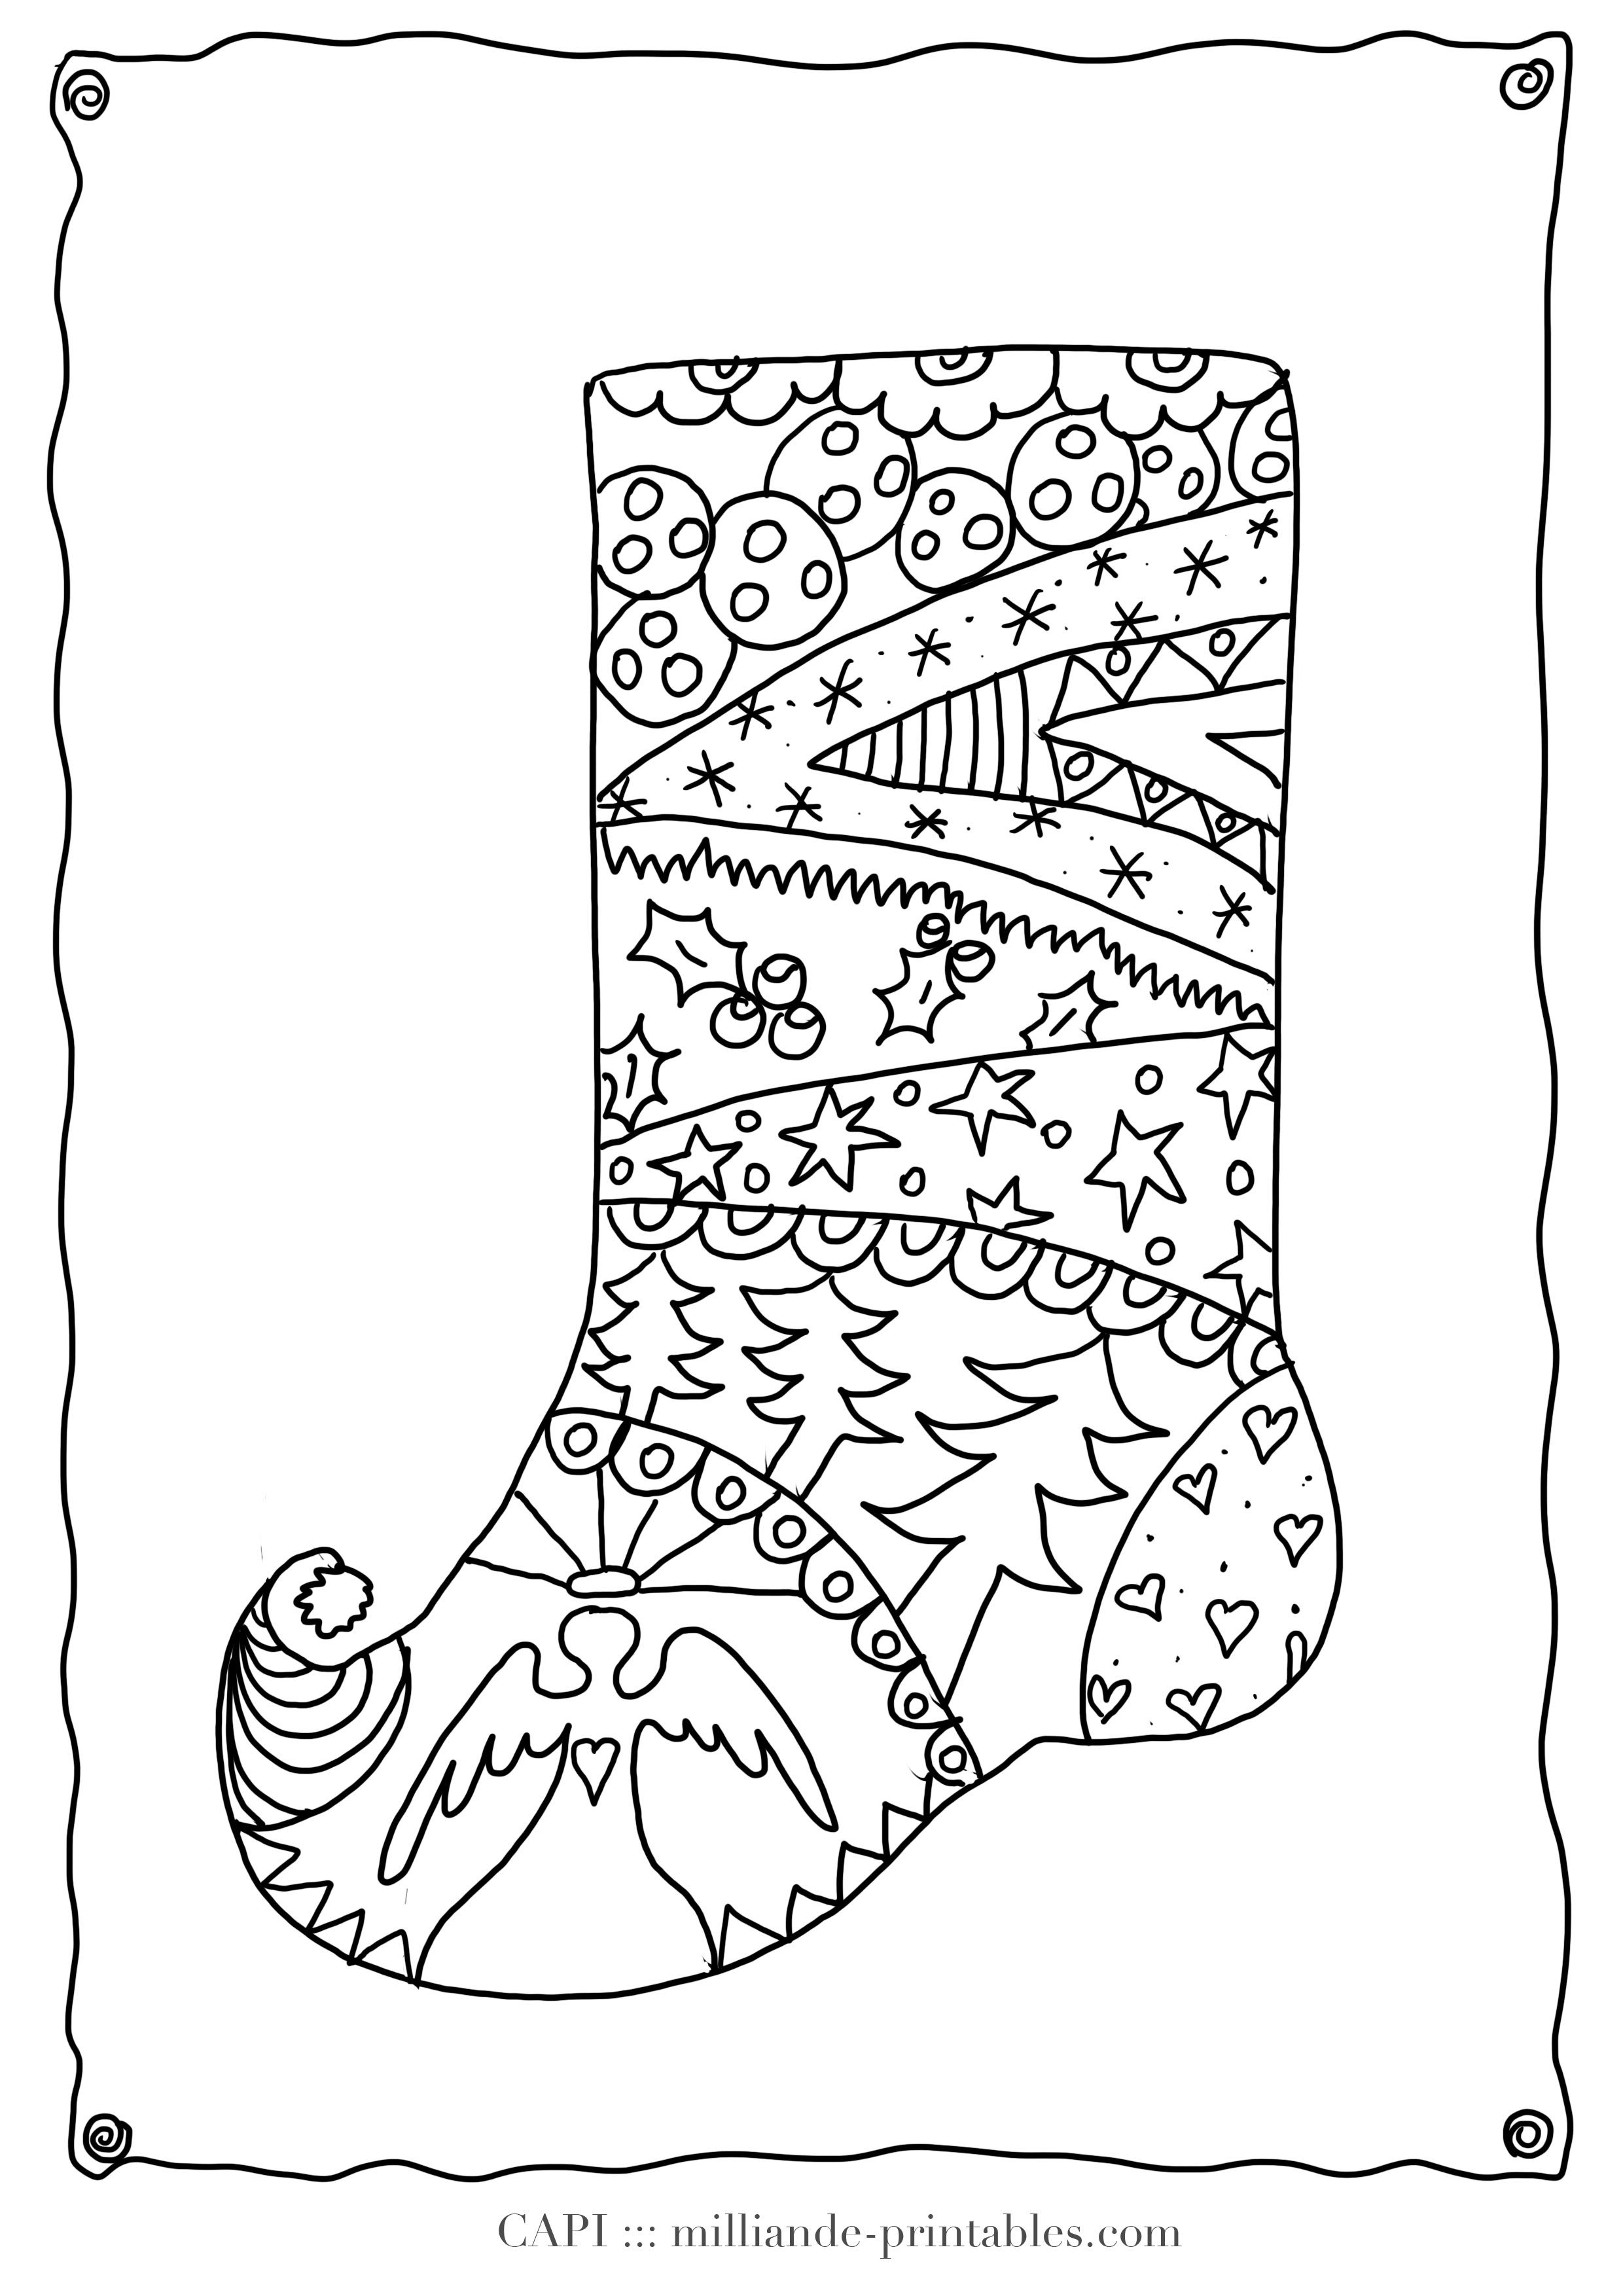 Christmas Stocking To Color Free Printable Christmas Coloring Pages - Free Printable Christmas Coloring Pages And Activities